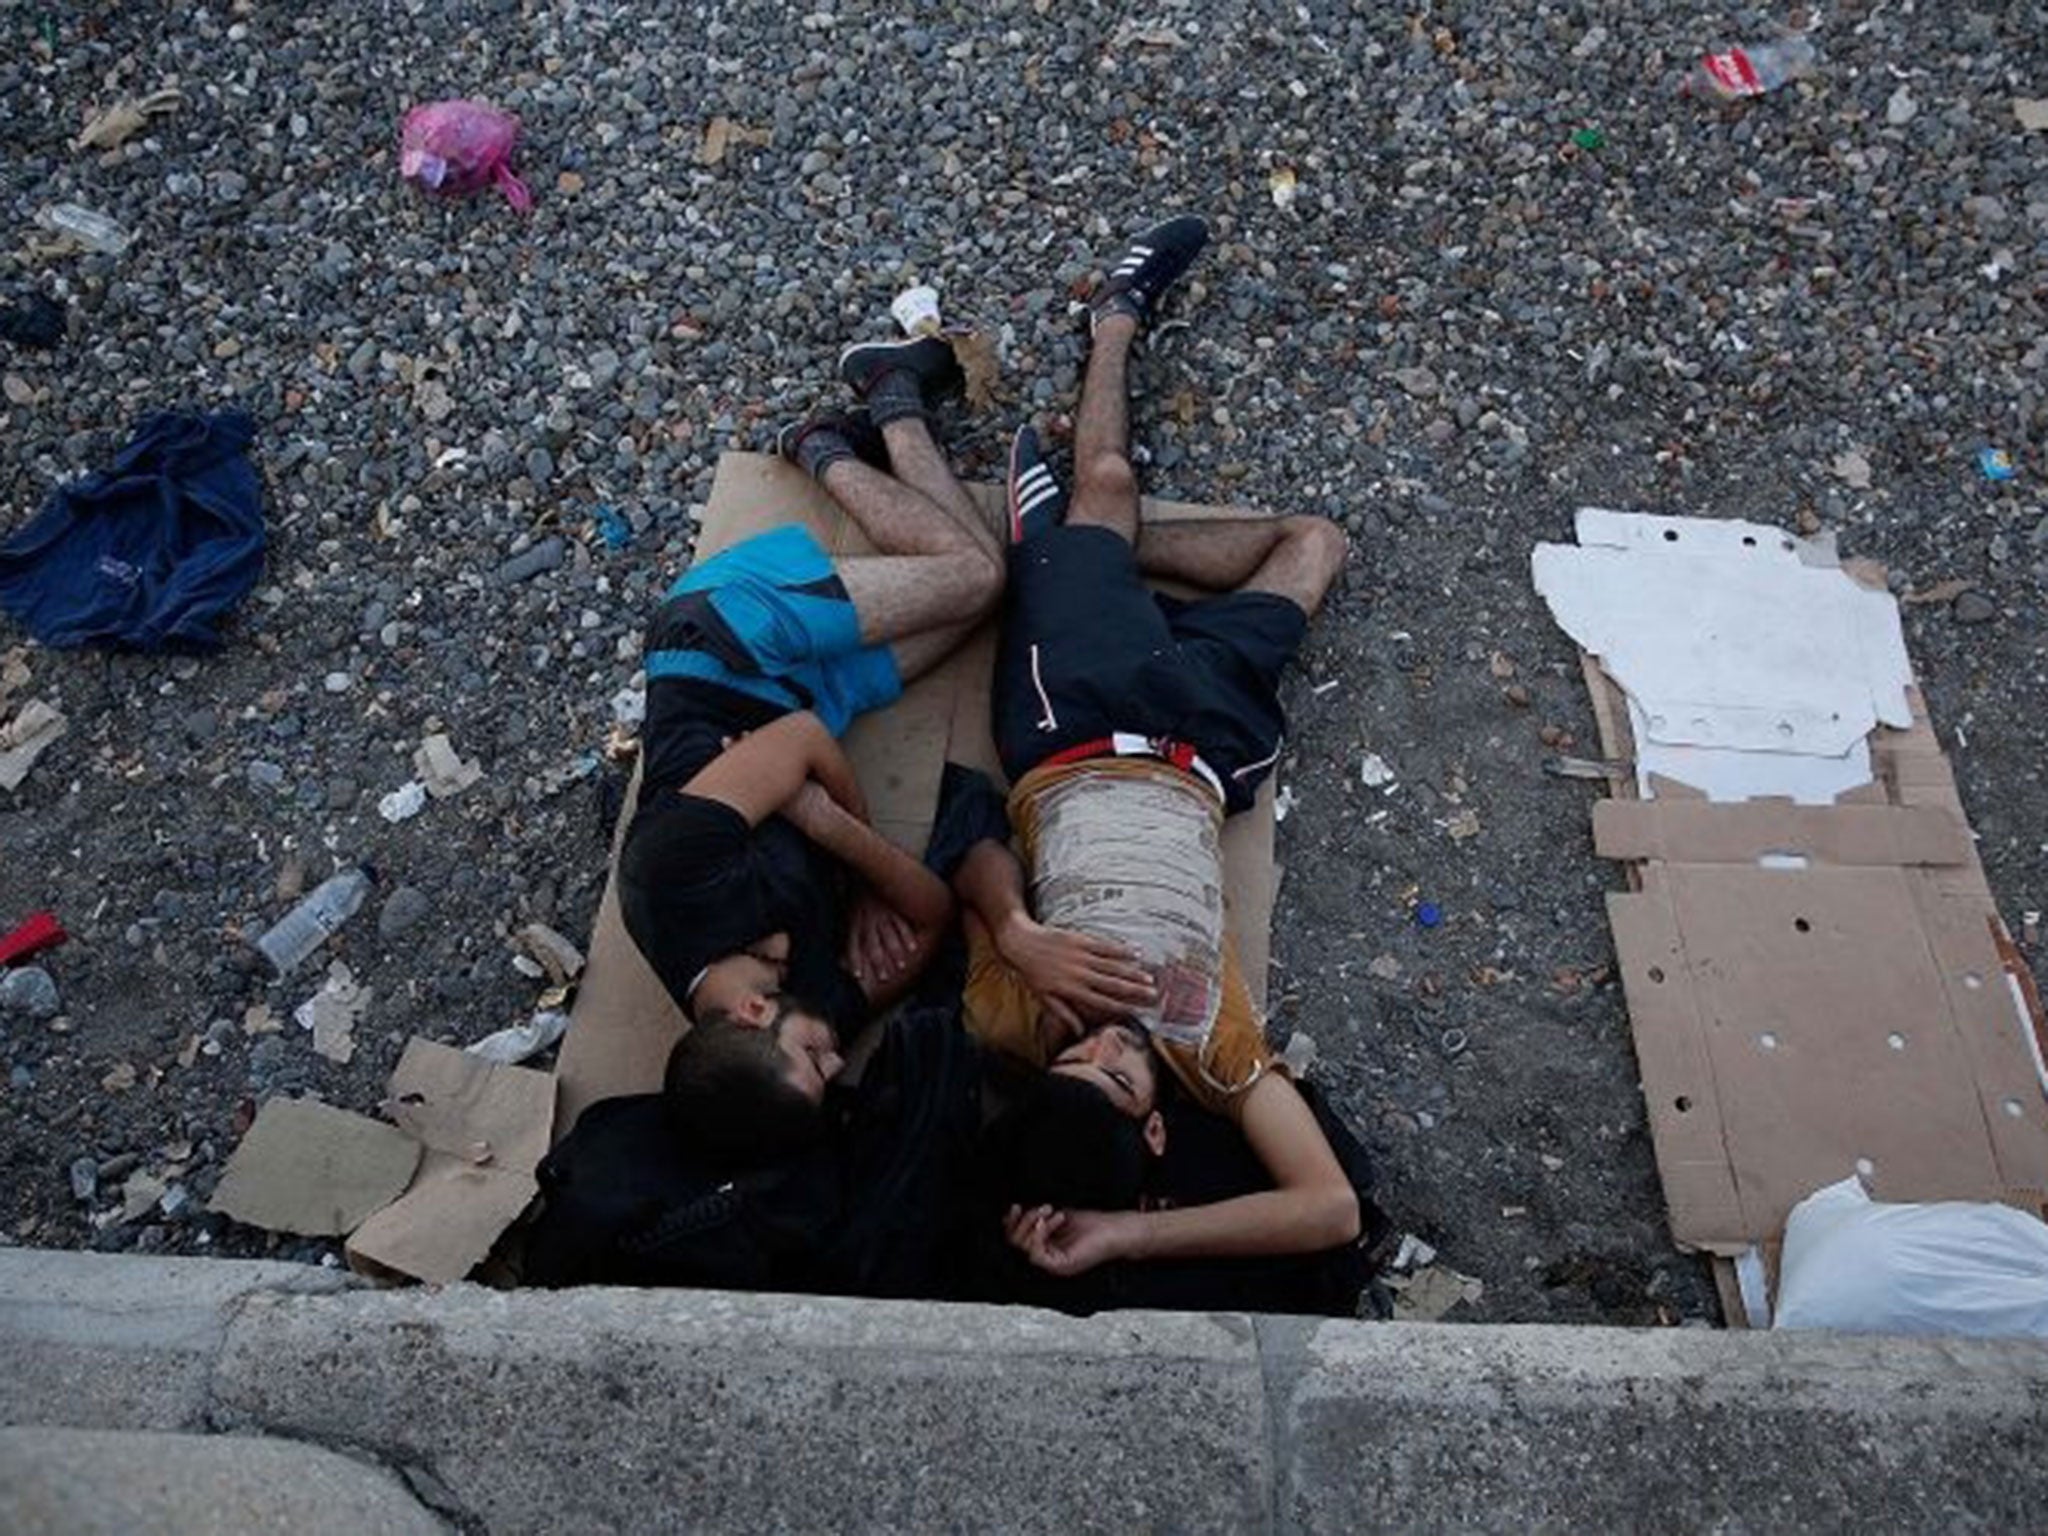 Two Syrian migrants who recently arrived in Greece sleep on a public beach August 28, 2015 in Kos, Greece. Migrants from the Middle East and North Africa continue to flood into Europe at a rate that marks the largest migration since World War II.